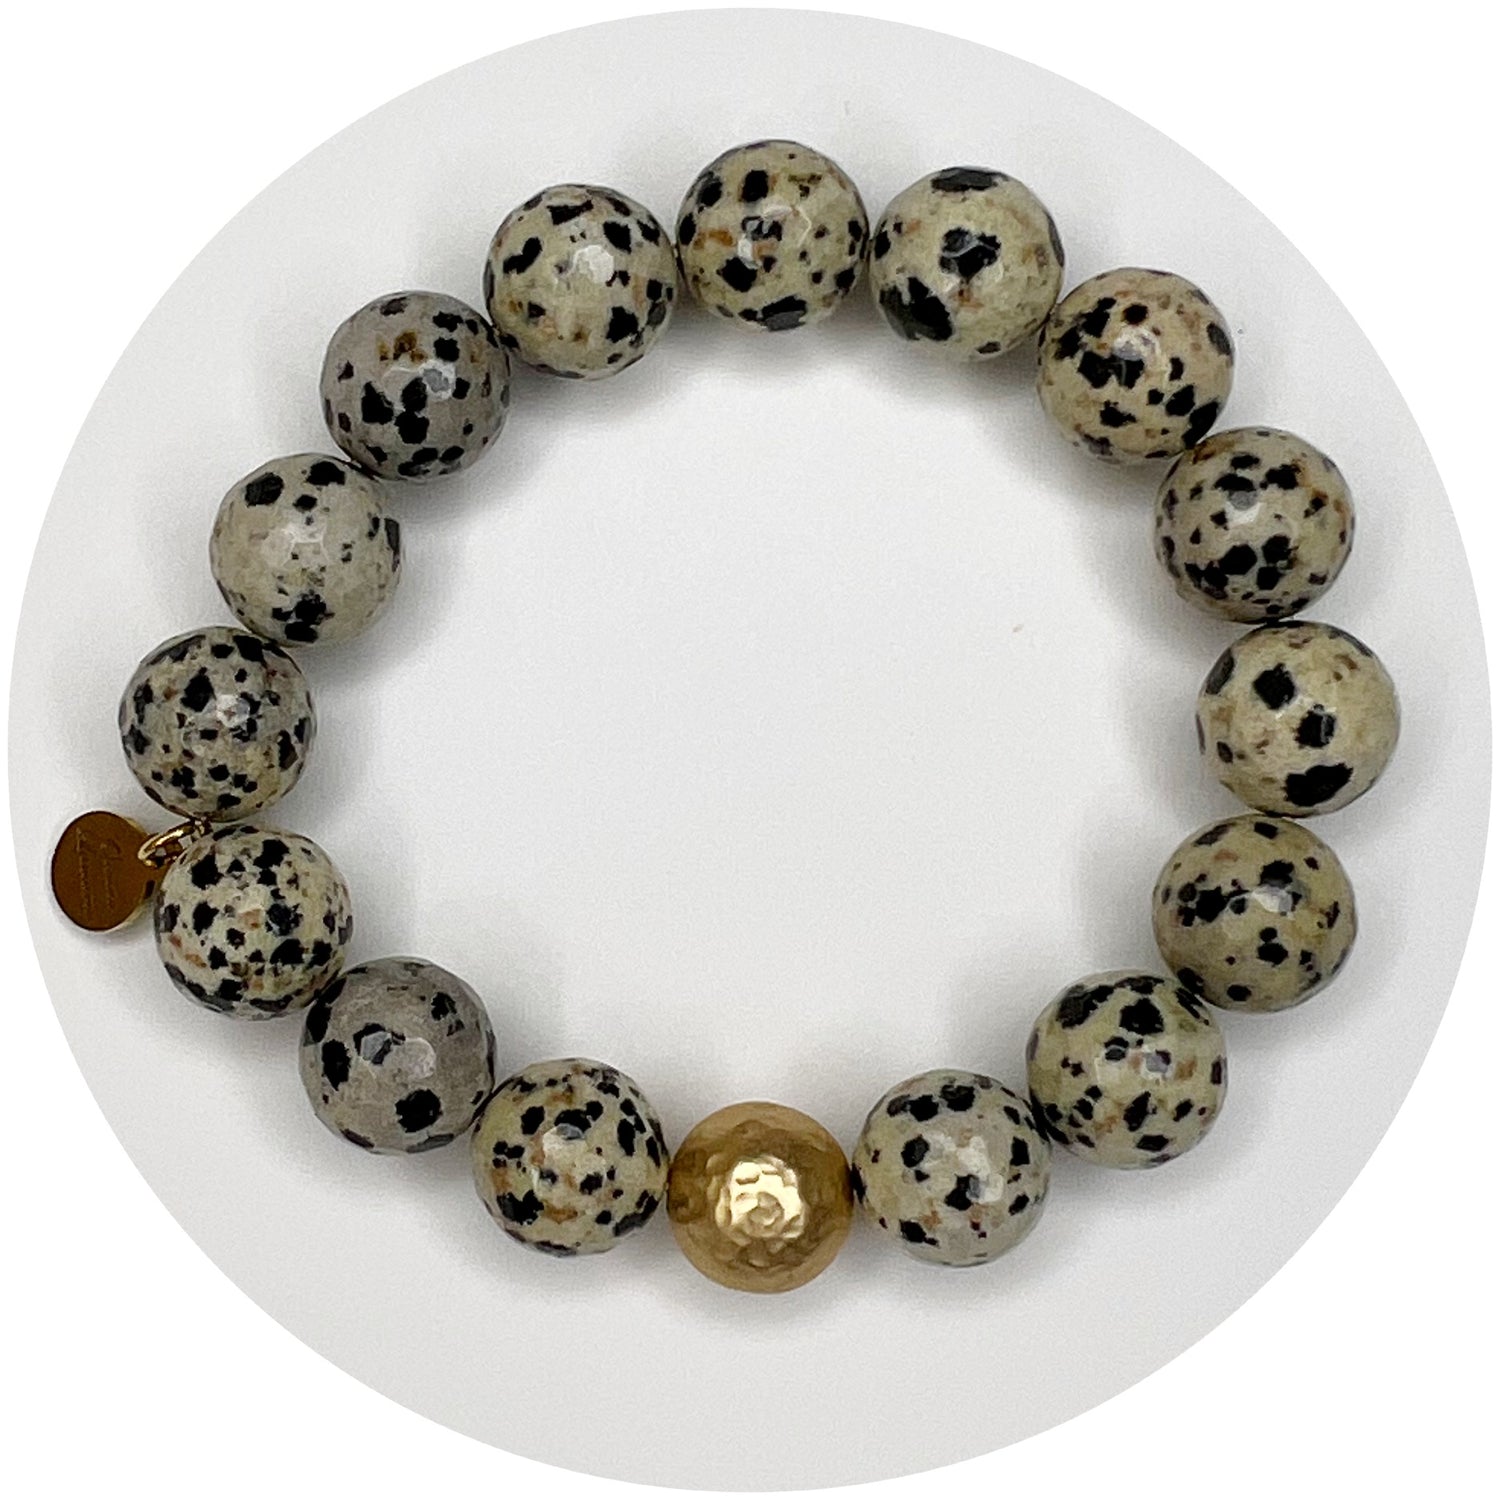 Dalmatian Jasper with Hammered Gold Accent